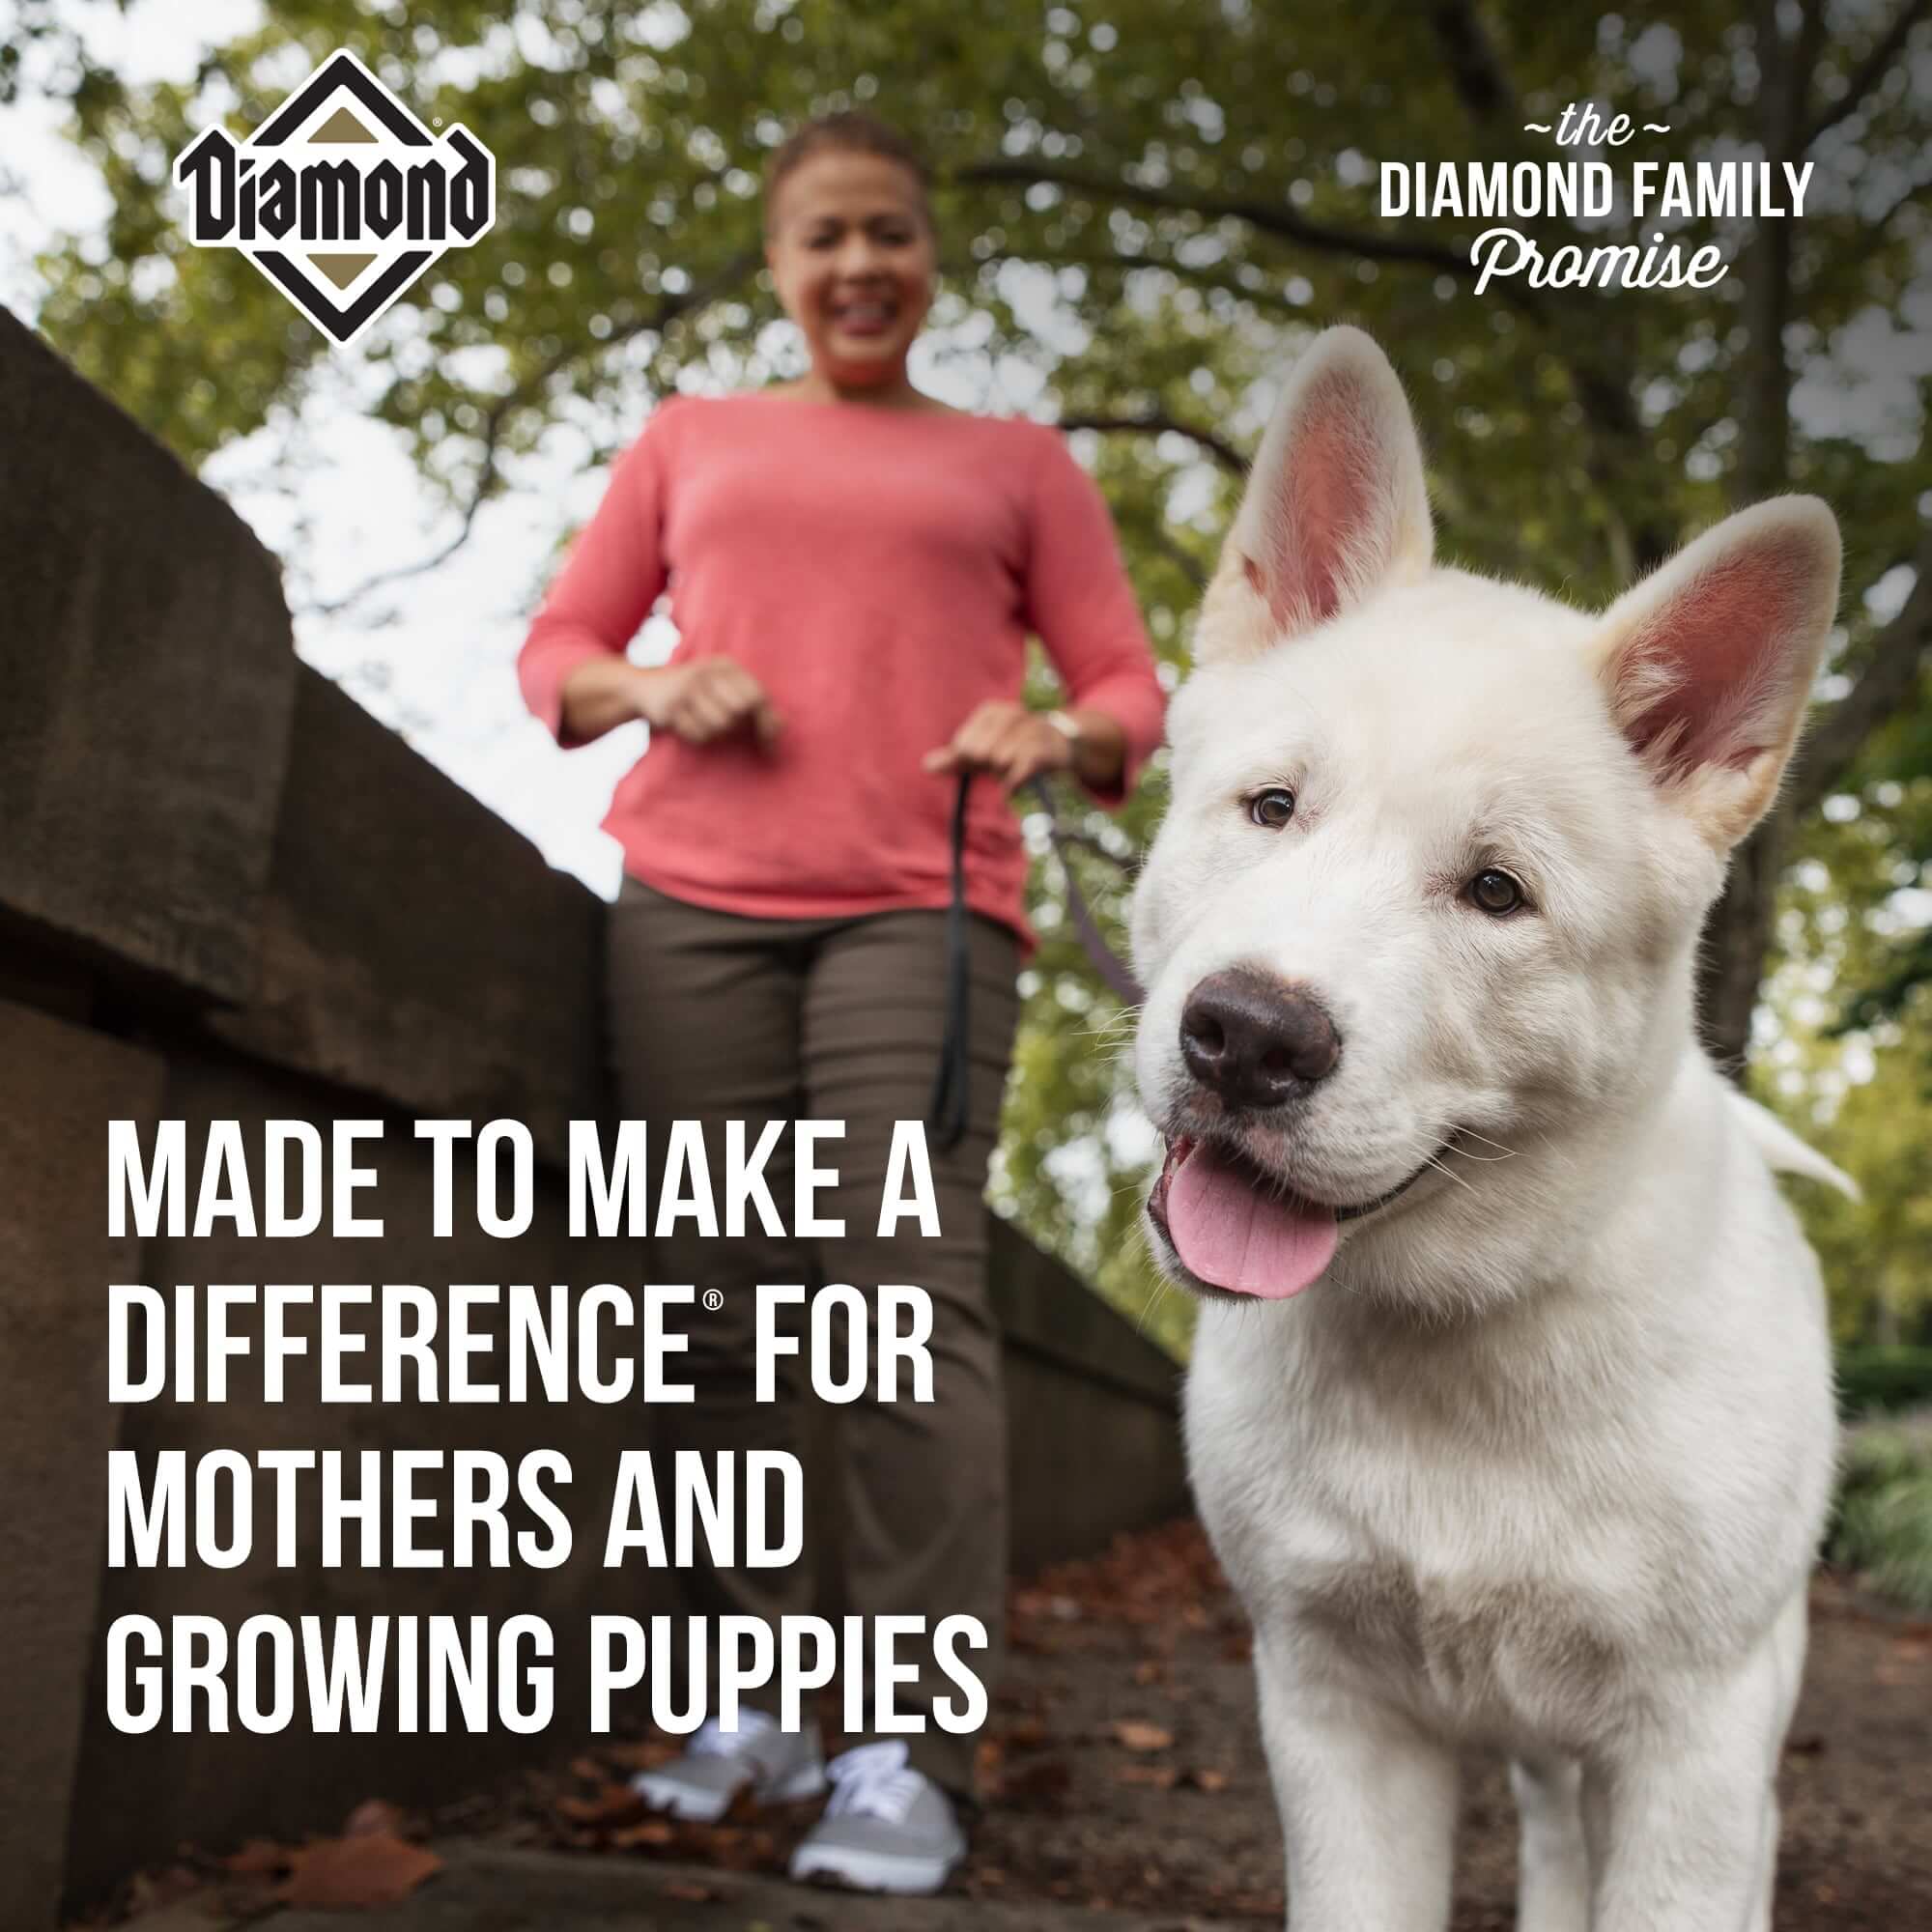 Made to make a difference for mothers and growing puppies